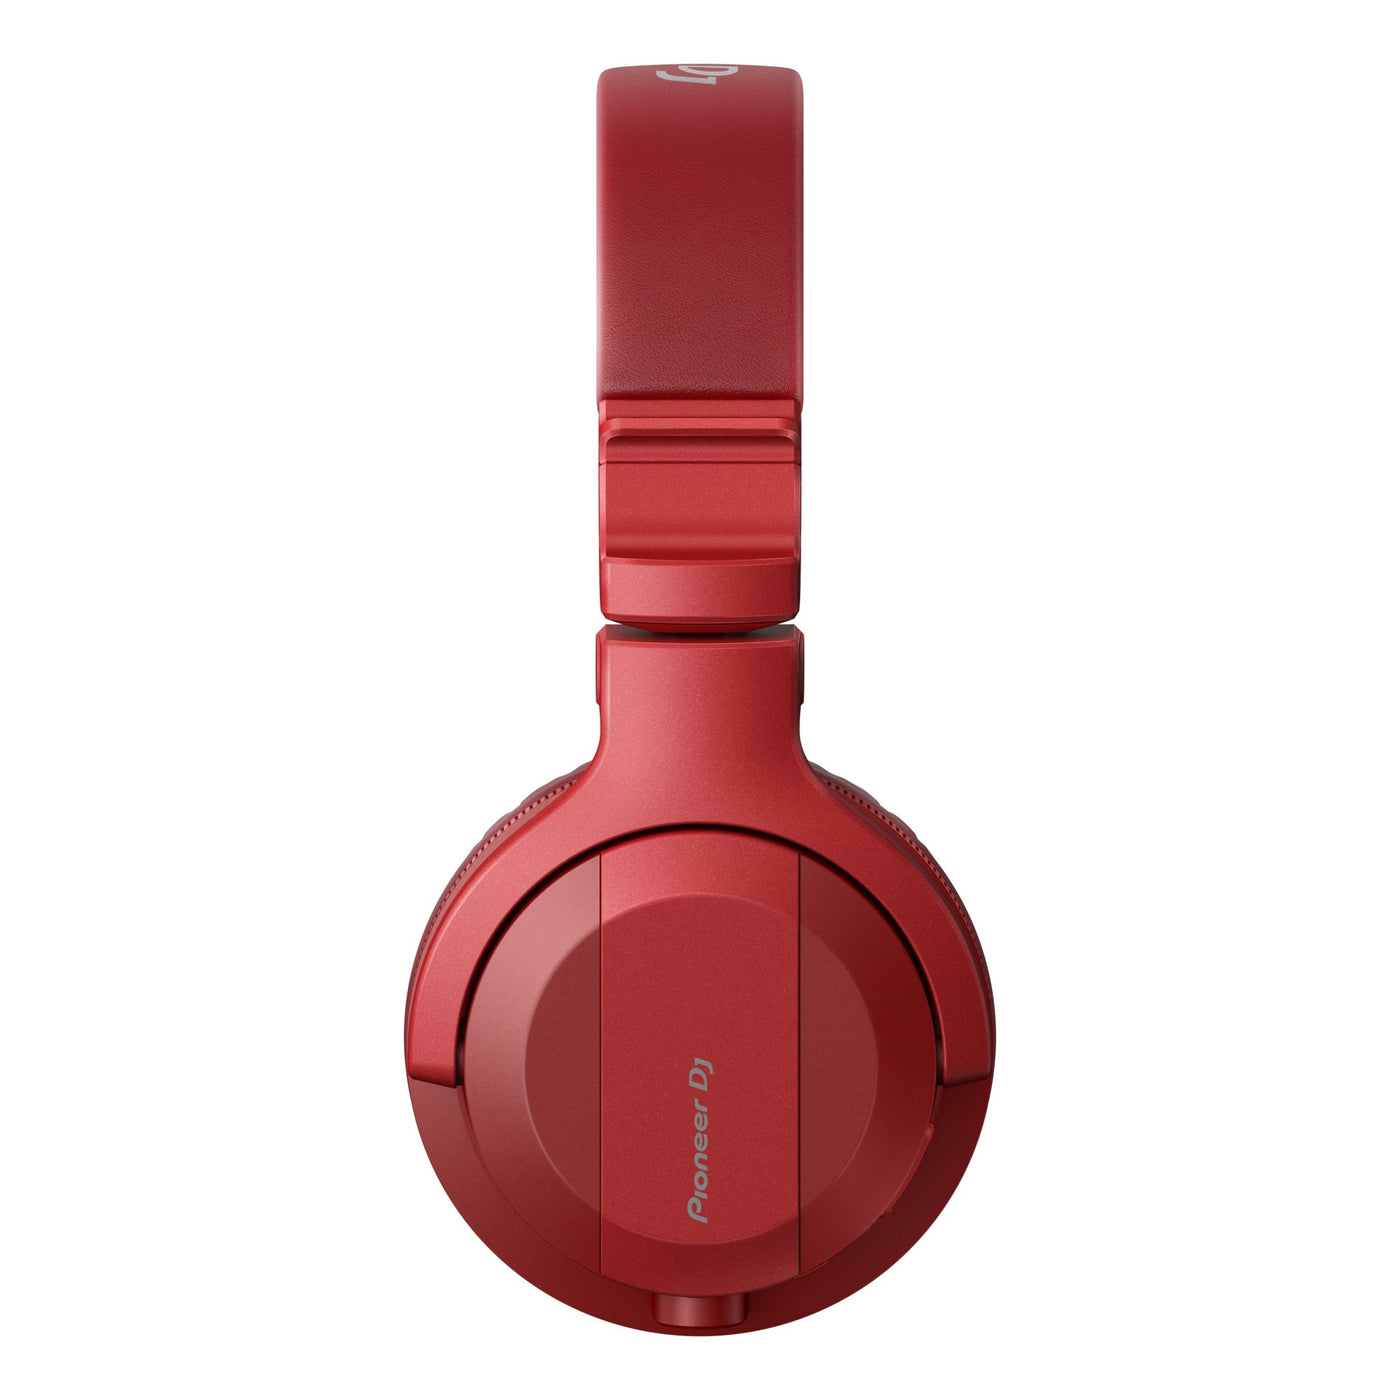 Pioneer DJ HDJ-CUE1BT-R On-Ear Wired Studio Headphones, Bluetooth Headphones, Professional Audio Equipment for Recording and DJ Booth, Red